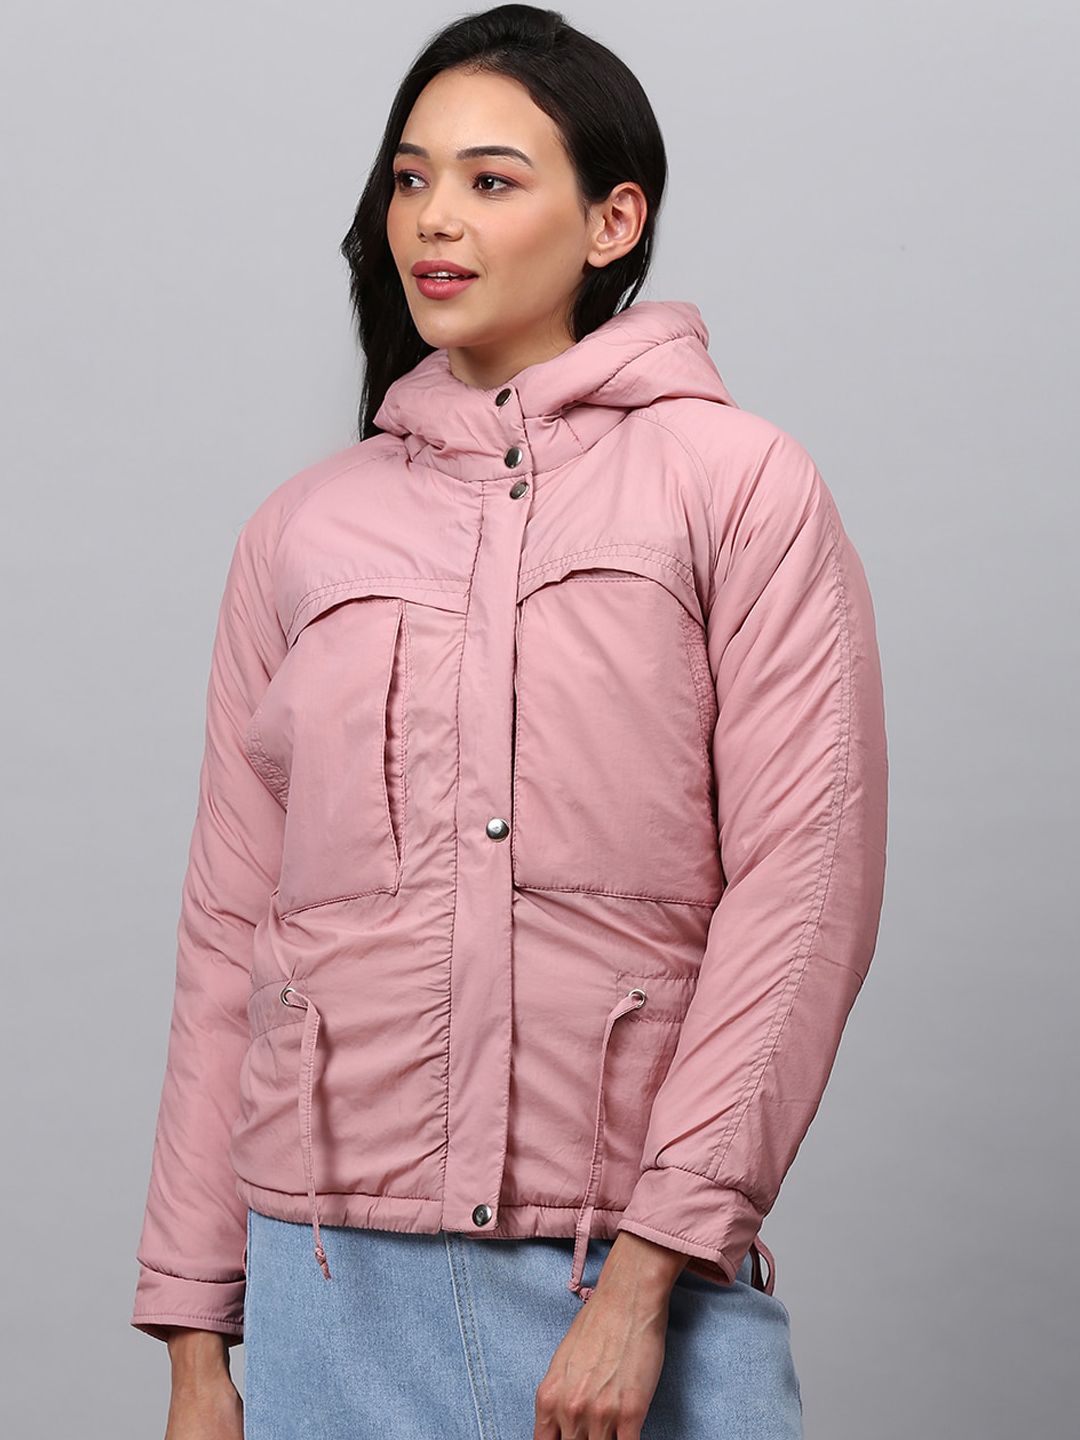 Campus Sutra Women Peach-Coloured Windcheater Outdoor Padded Jacket Price in India